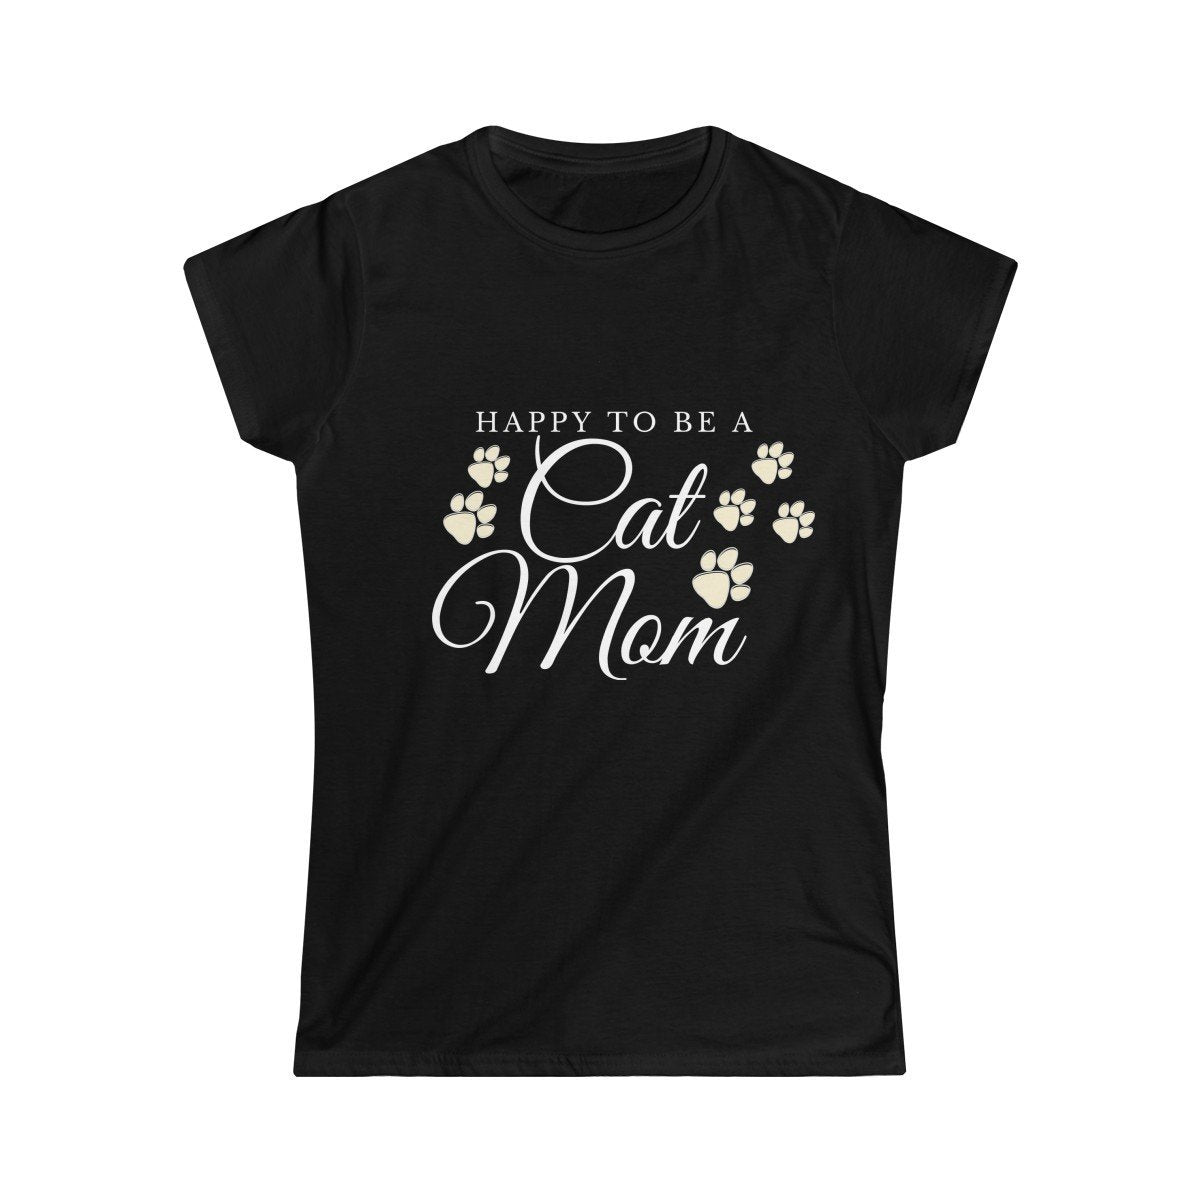 Cat Lover T-Shirt for Women with the Phrase Happy to Be a Cat Mom Printed On the Front